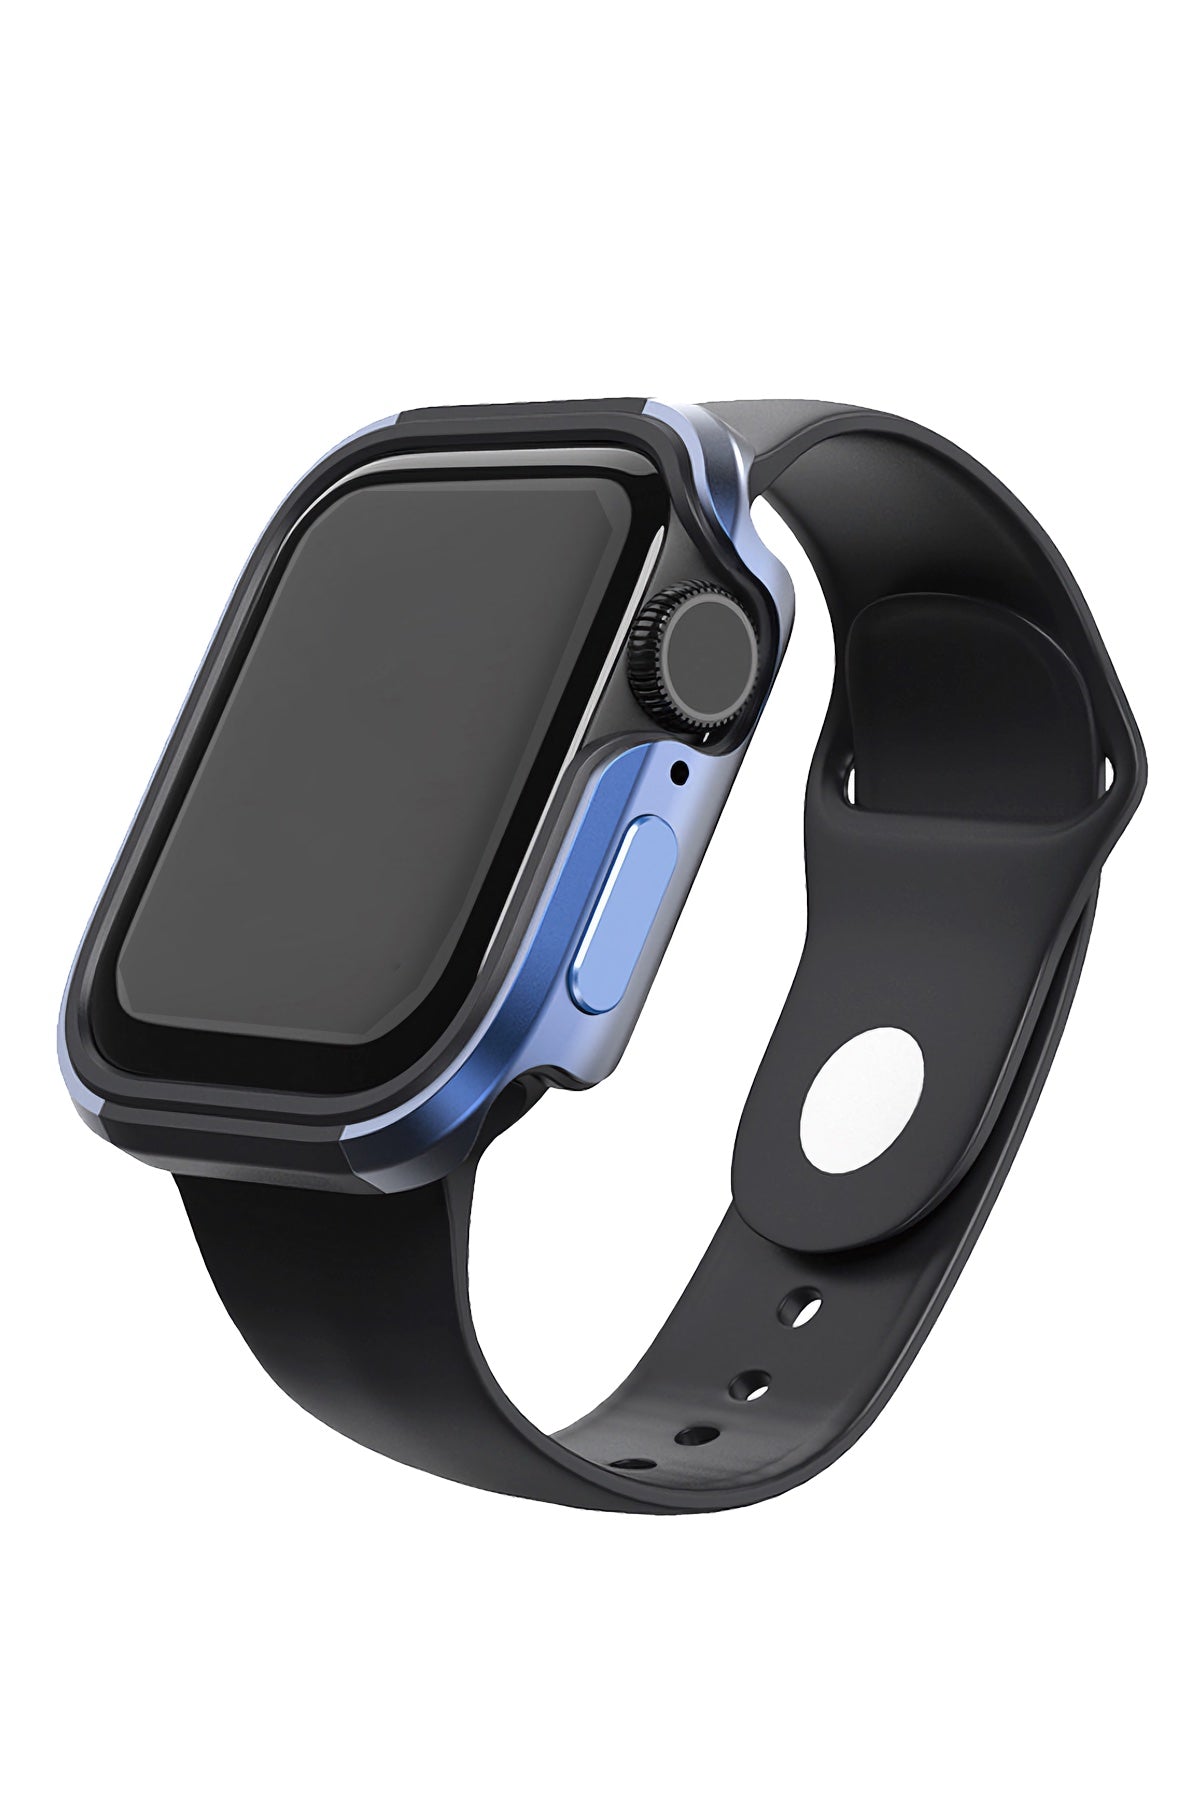 Wiwu Defense Apple Watch Compatible Case Protector Blue 